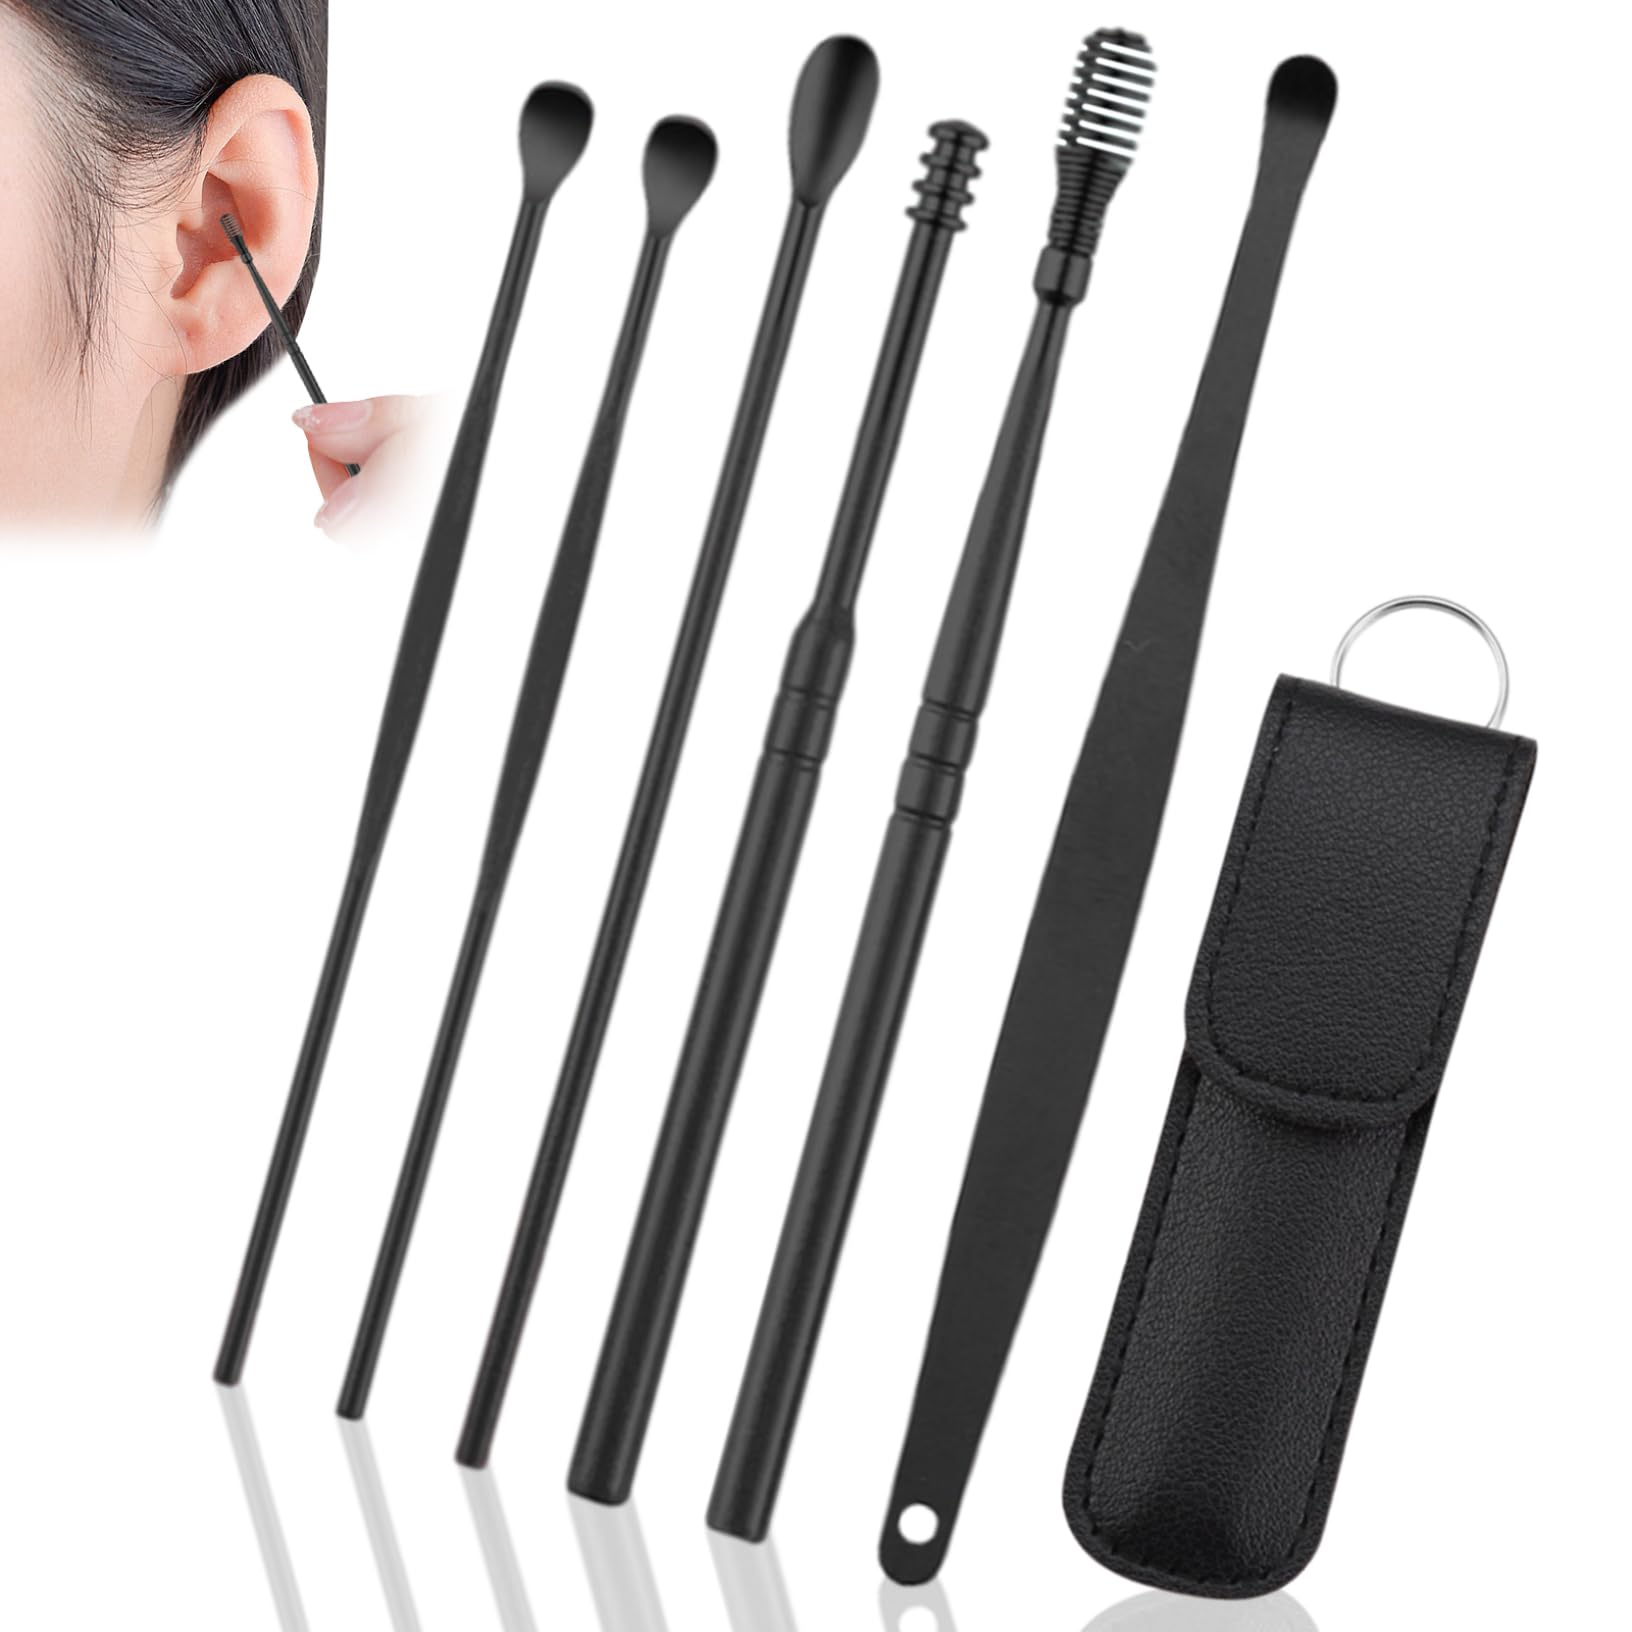 Ear Cleaning Kit 6Pcs Ear Wax Removal Ear Cleaner Earwax Removal Kit with Storage Sleeve, Painless Ear Picks Easy to Use Stainless Steel Ear Cleansing Tool Set for Relaxing, Massaging Ears